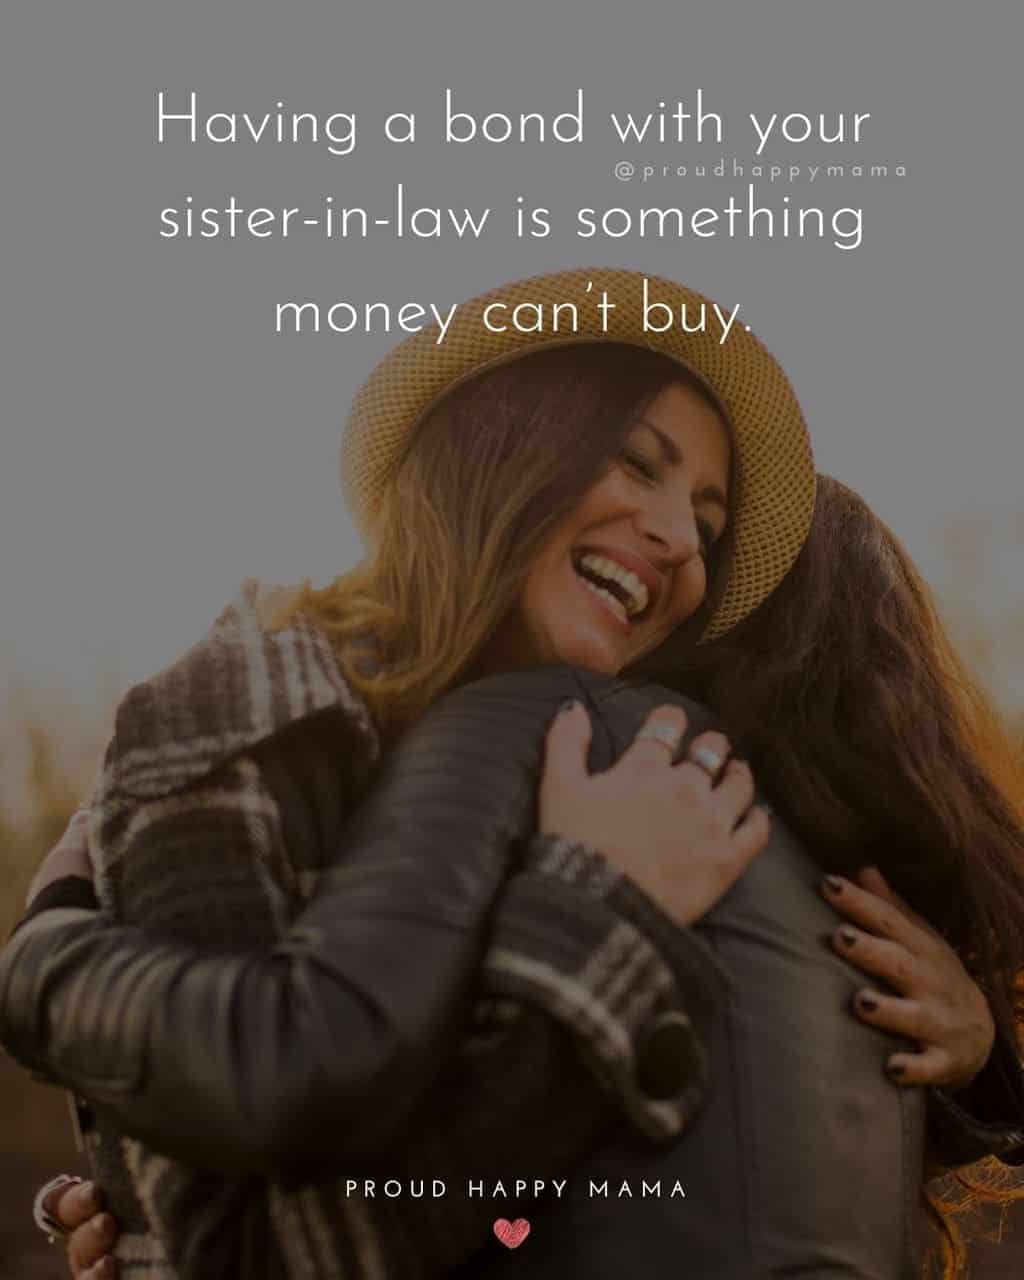 50 Sister In Law Quotes And Sayings (With Images)